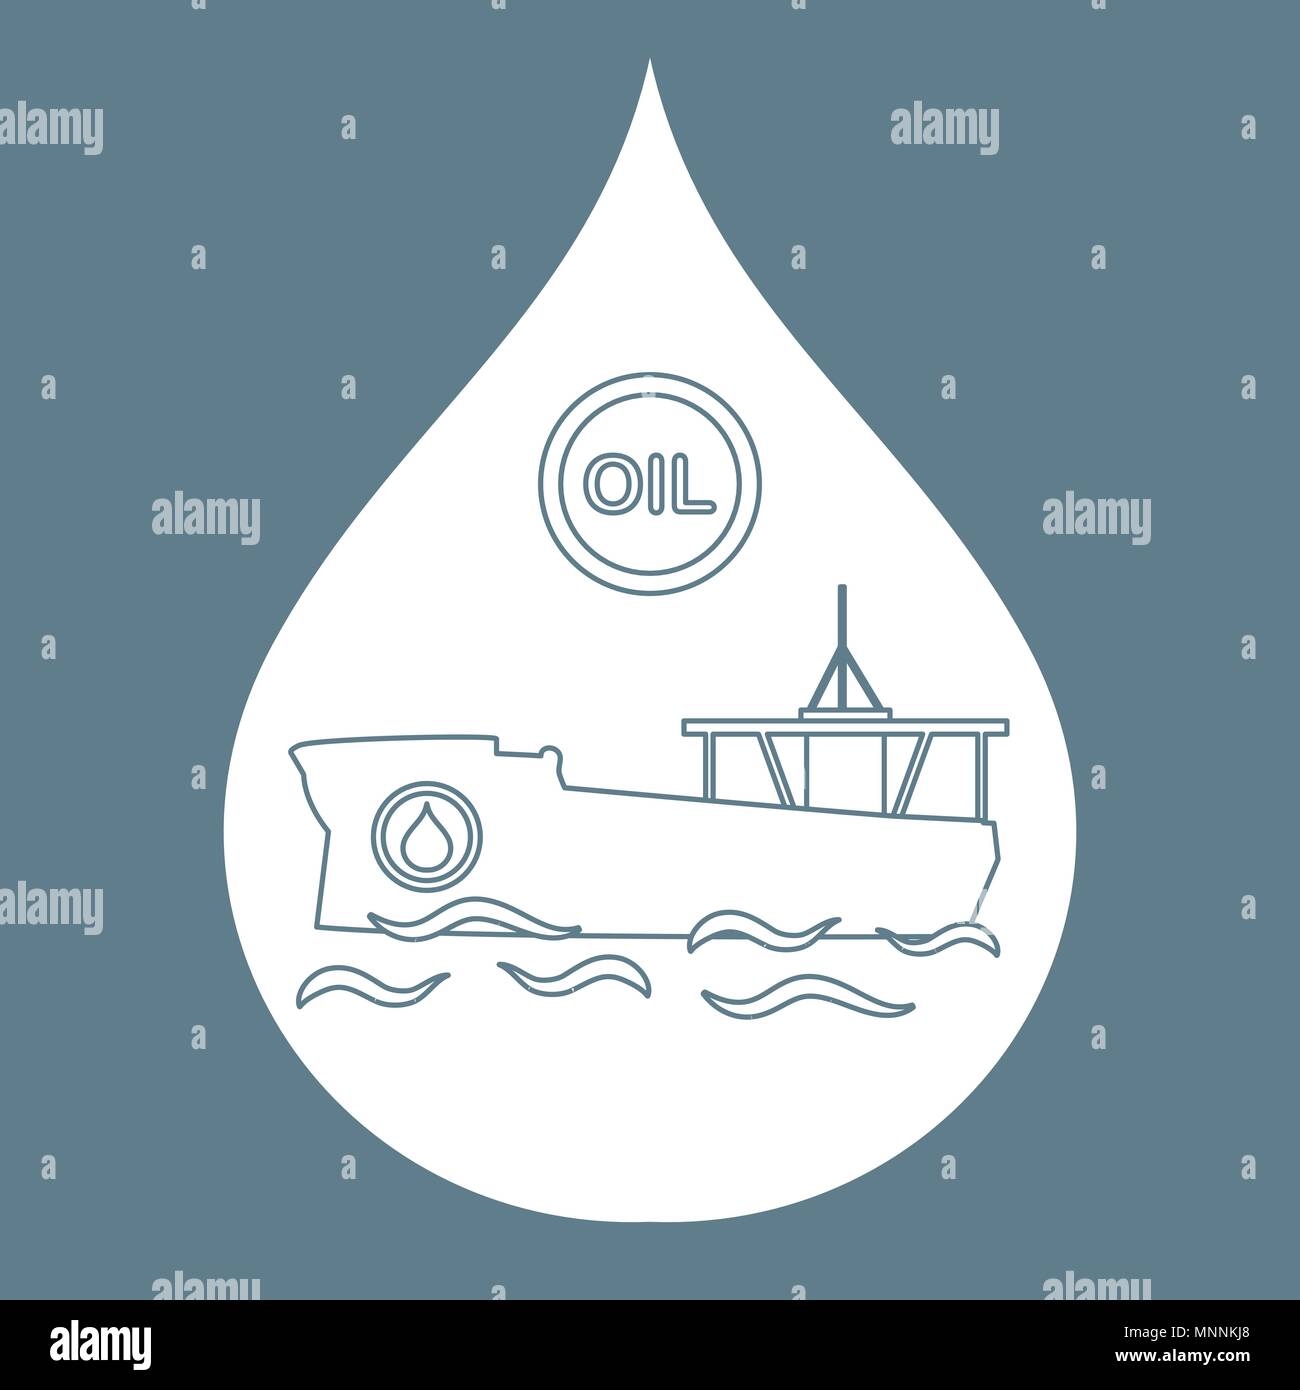 Drop inside which a tanker carrying oil. Production and transportation of oil. Stock Vector